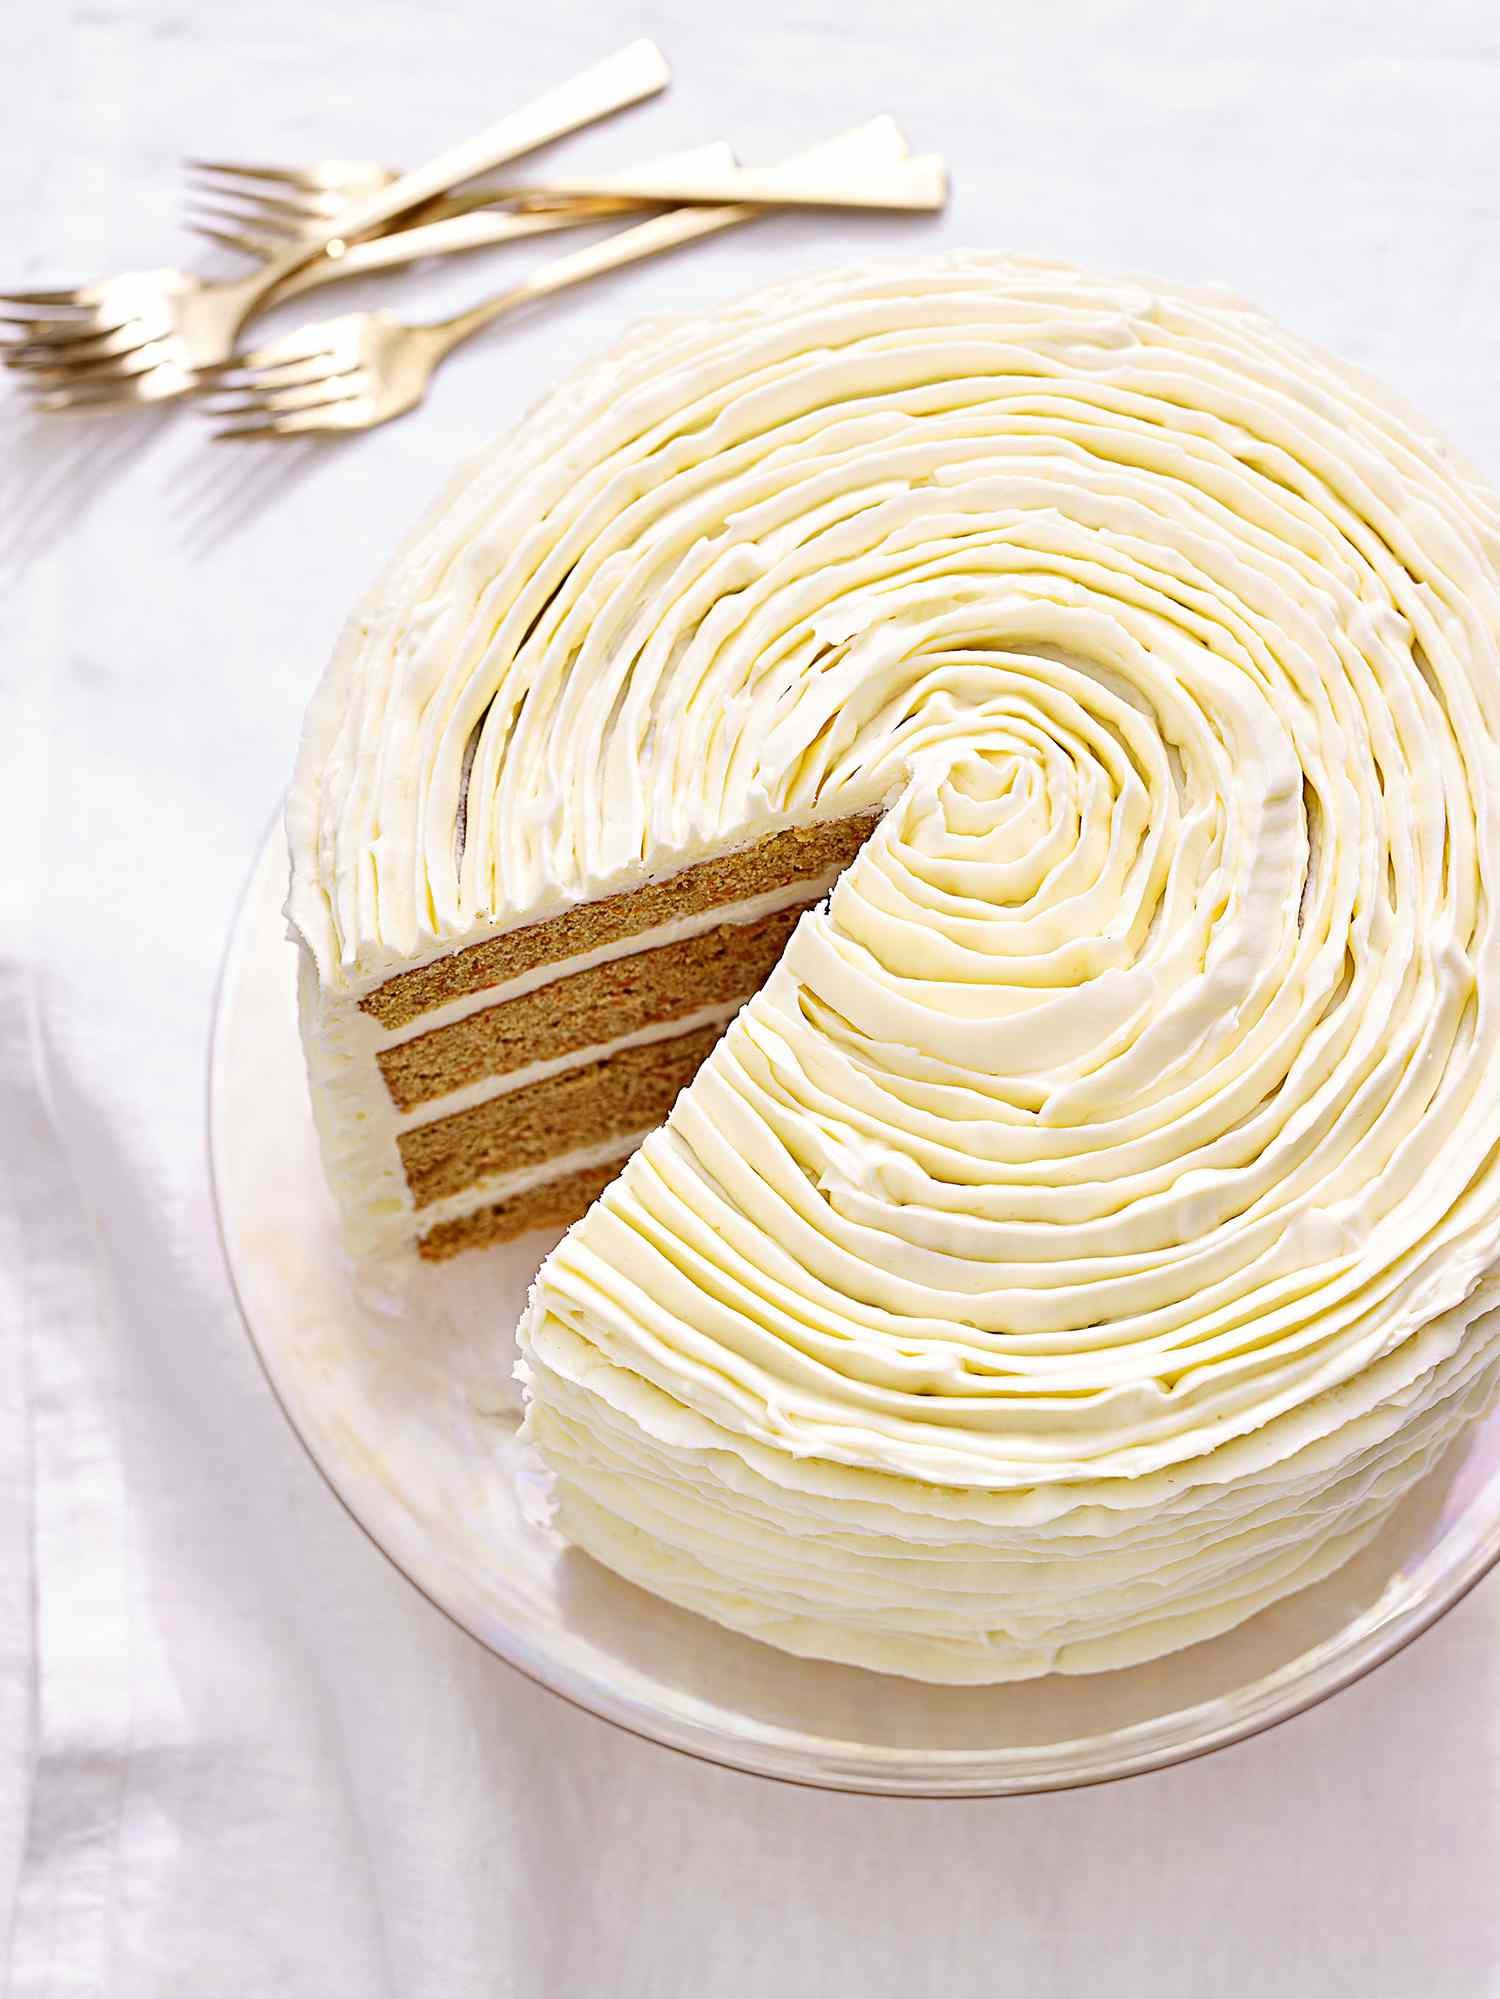 carrot cake with white chocolate frosting